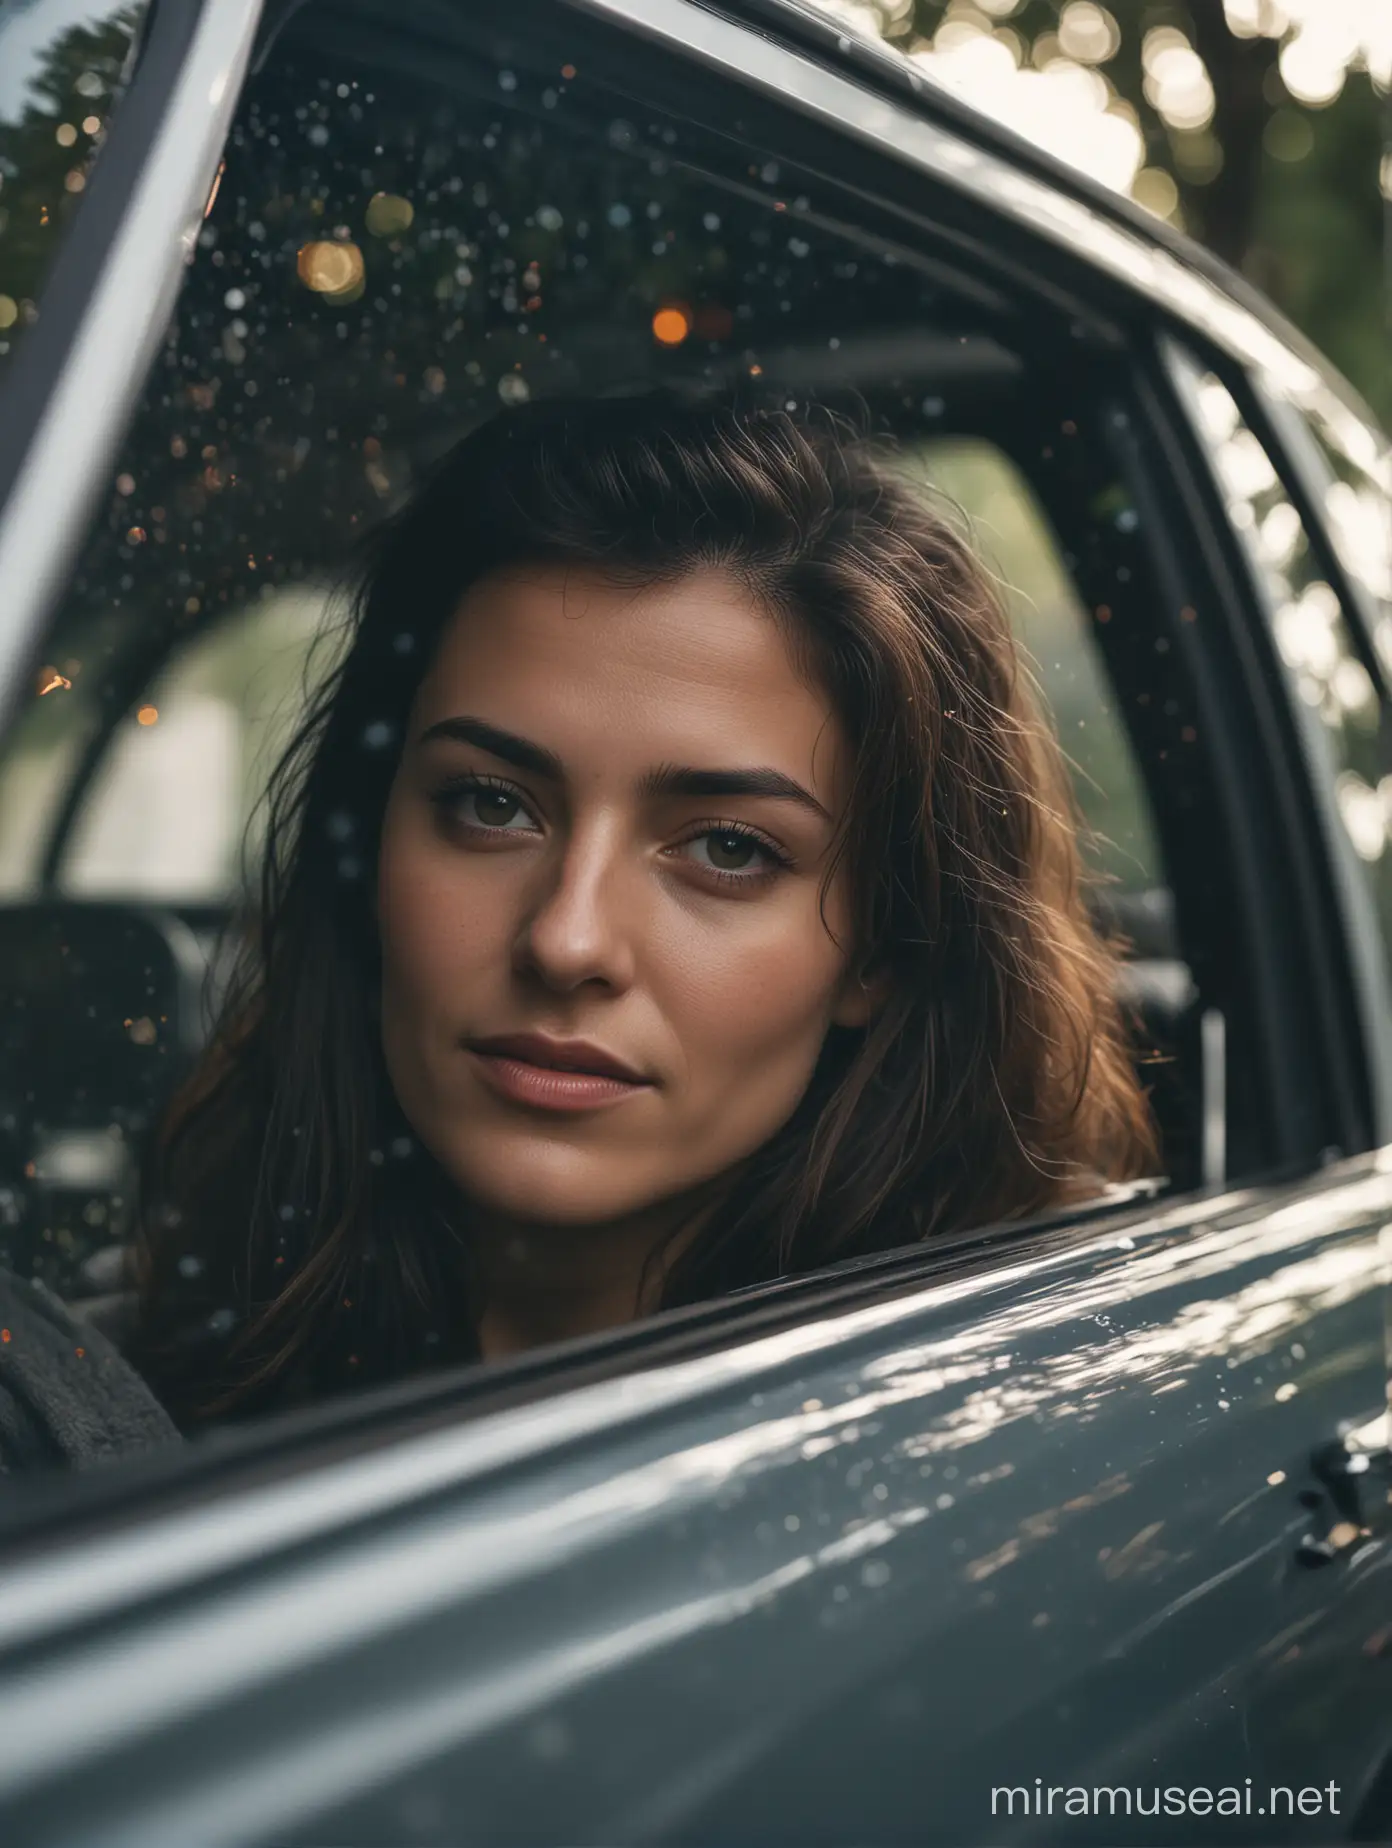 Realistic Woman in Cinematic Car Interior with Bokeh and Tree Reflections